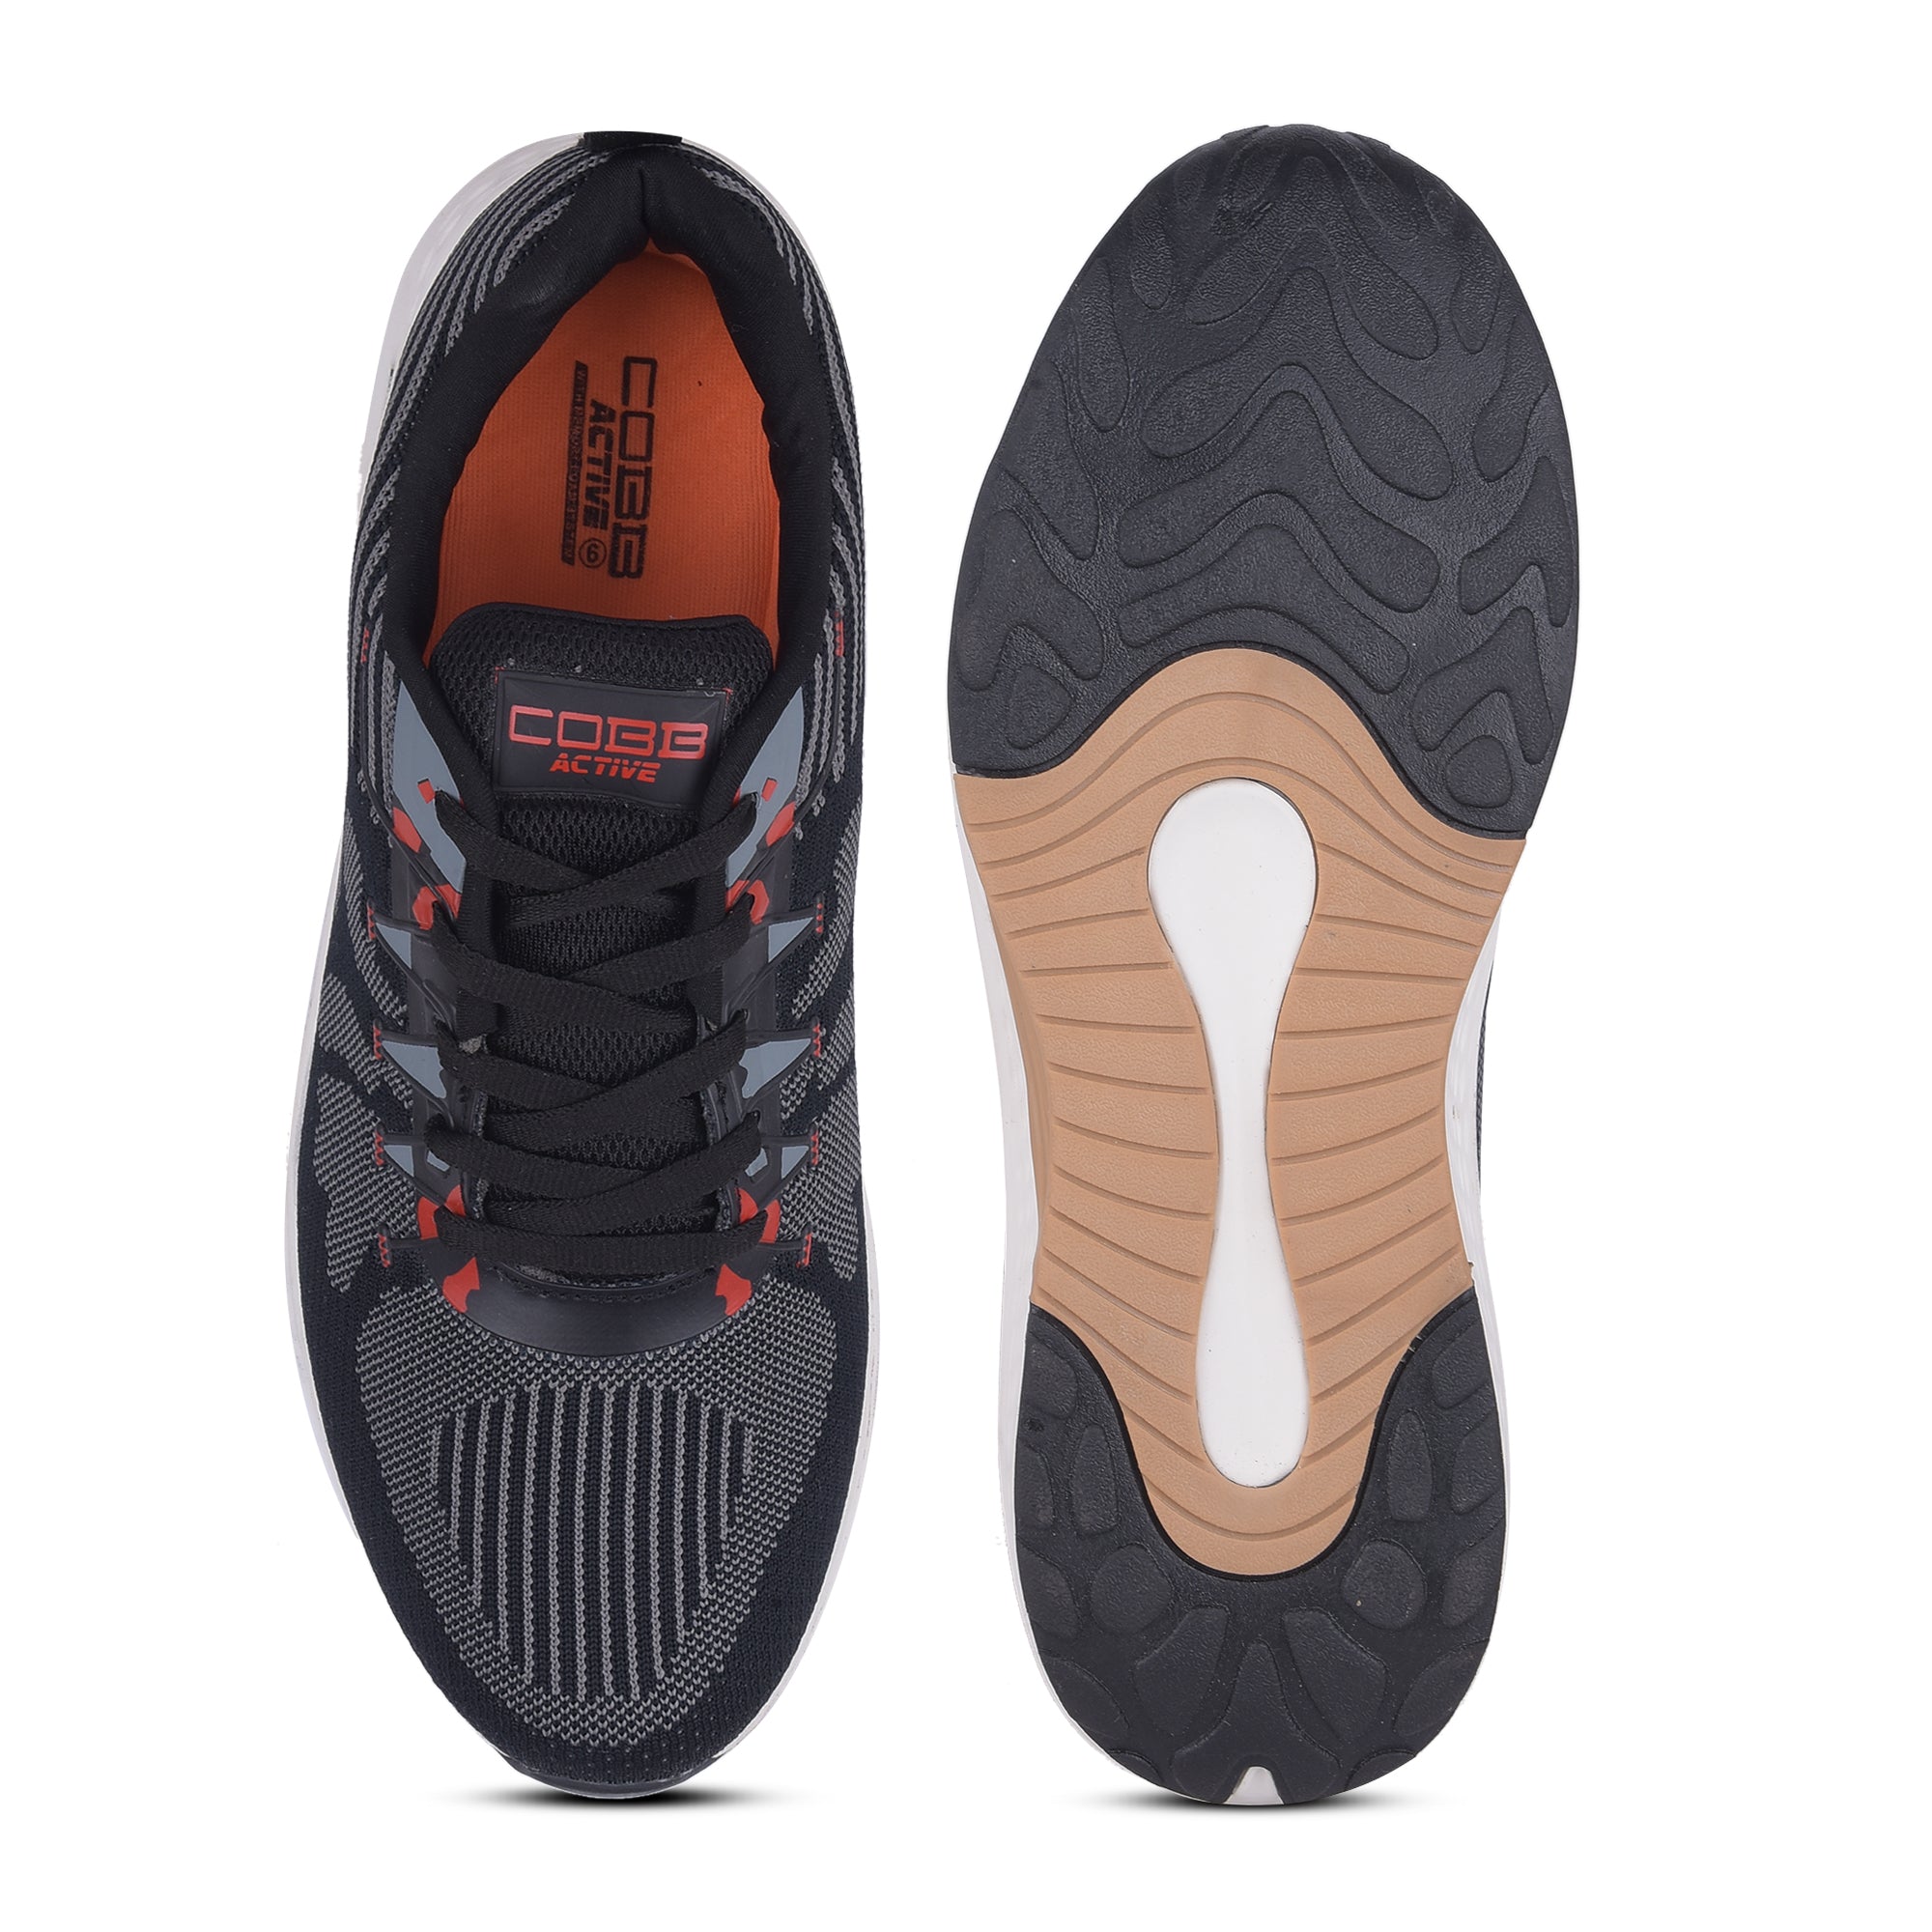 Buy Cricket Active Shoes Online at Best Prices in India - JioMart.